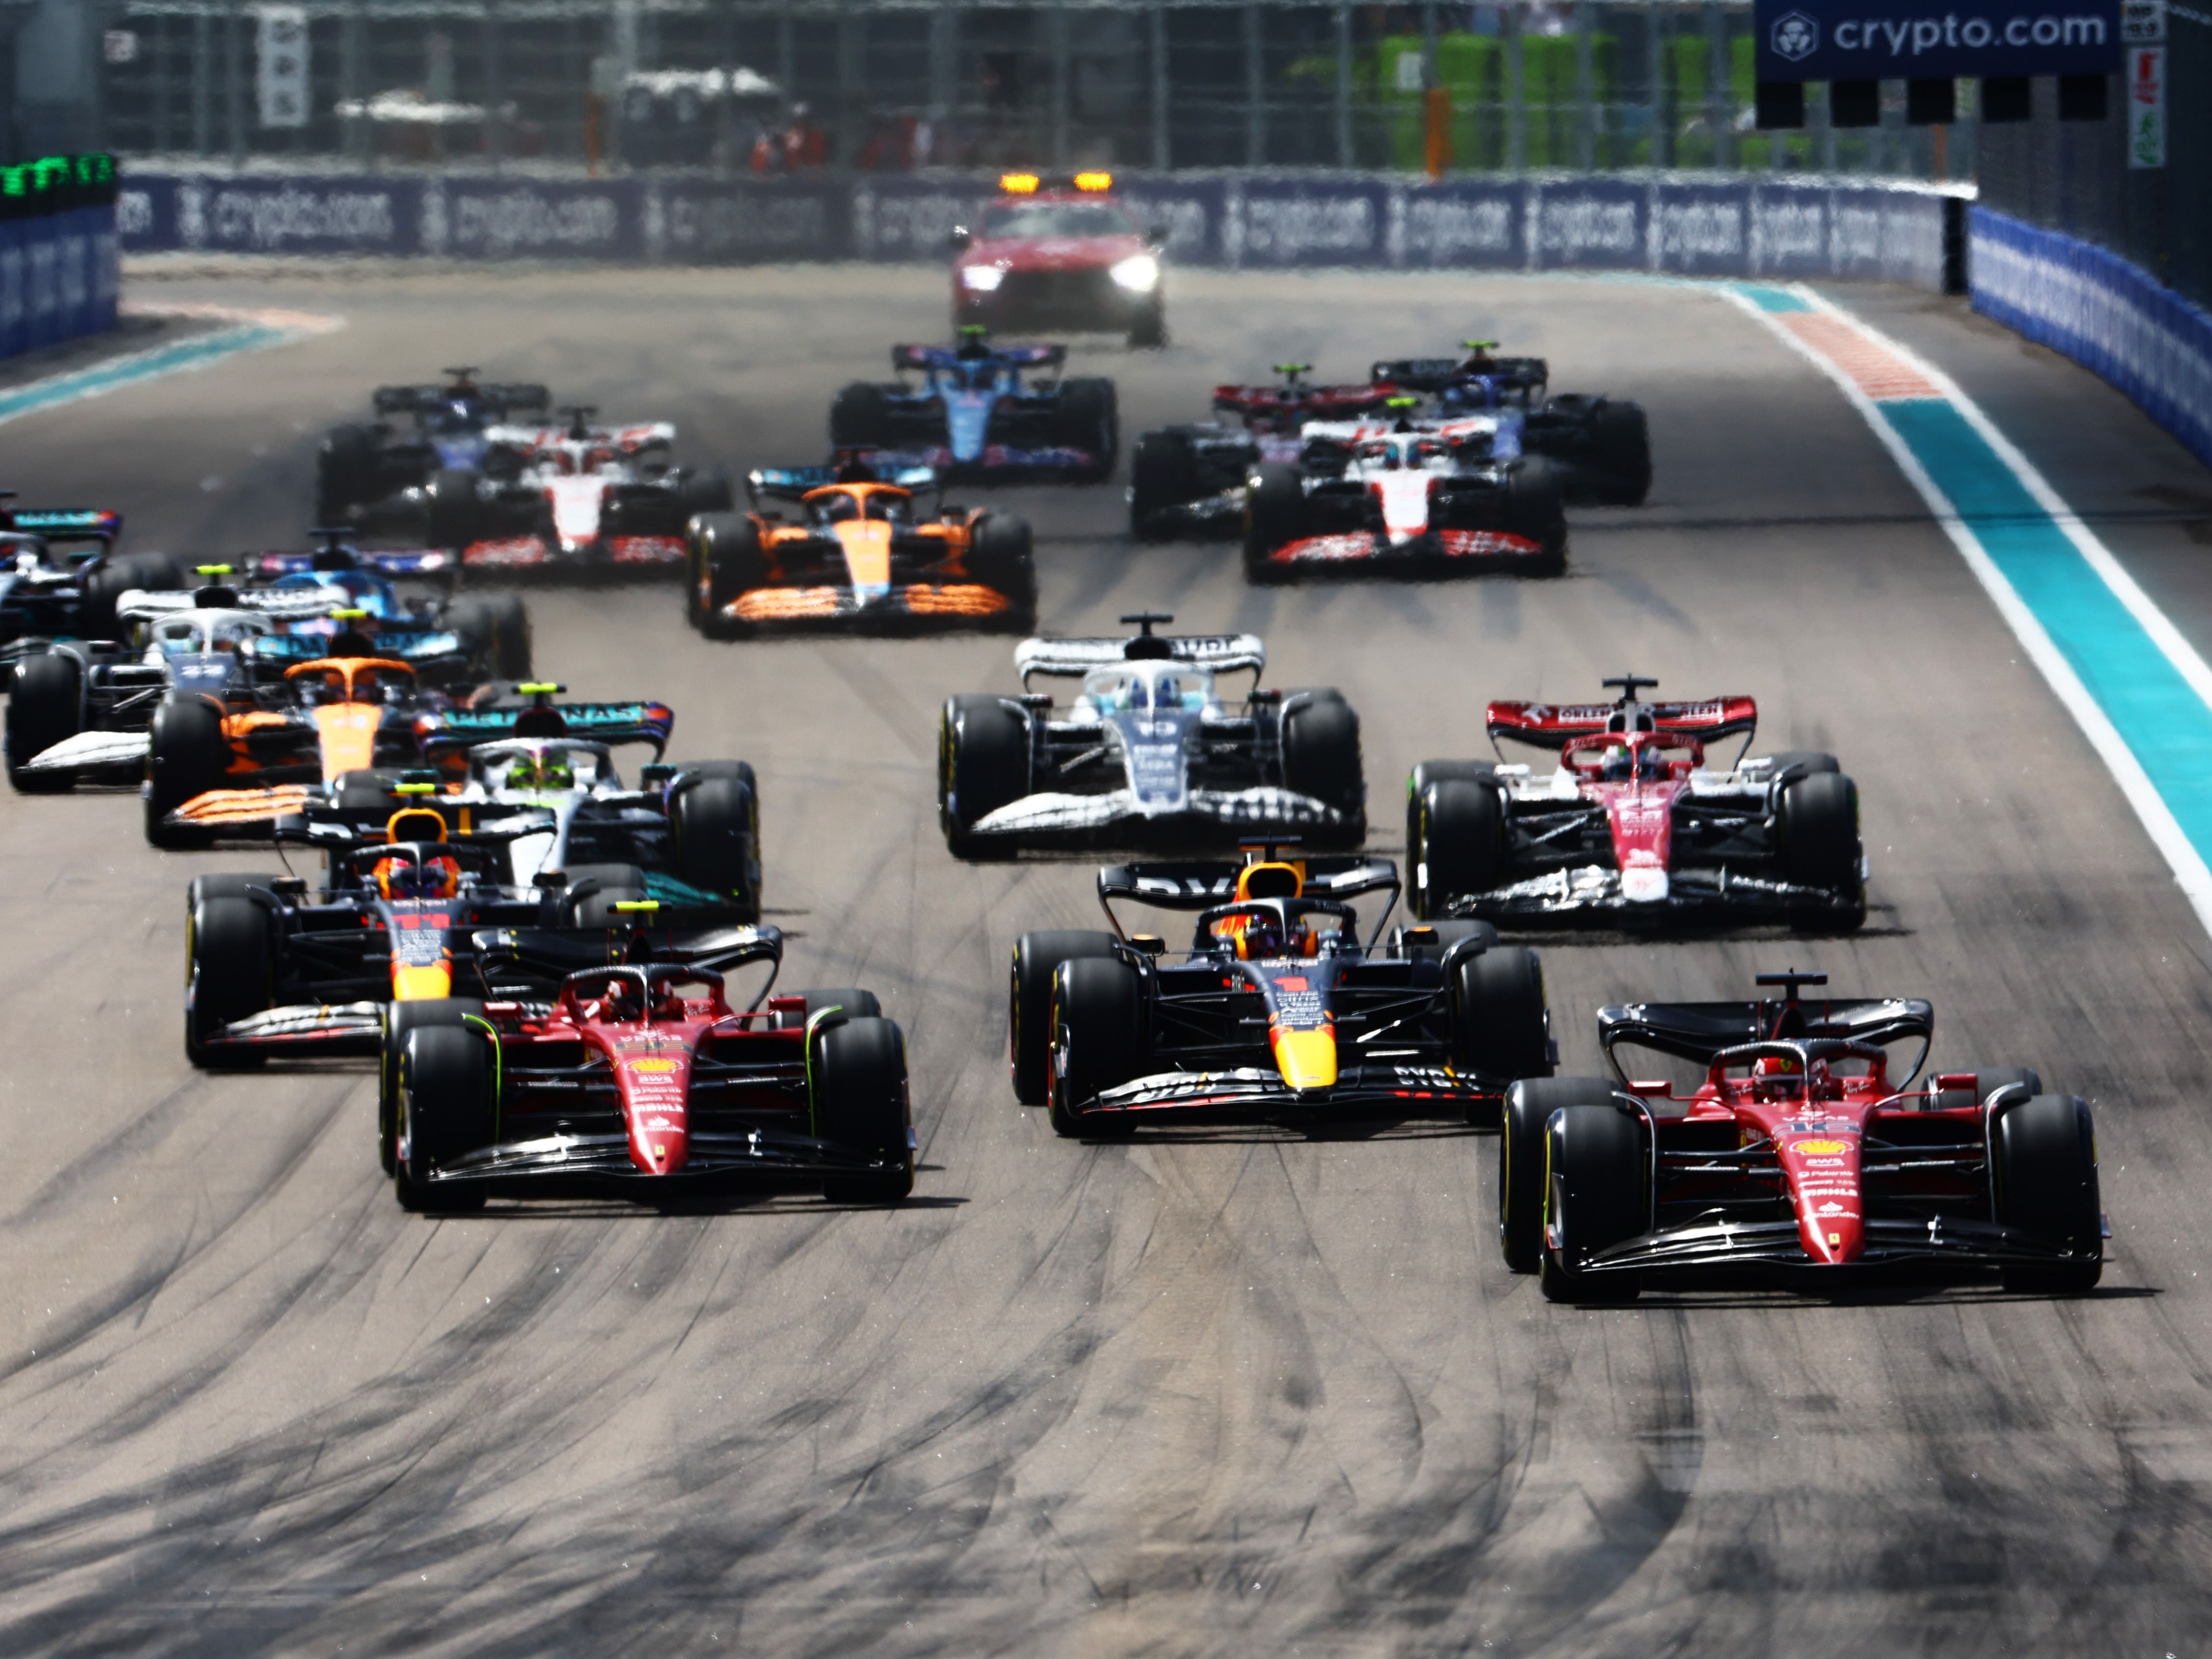 Charles Leclerc (16) leads Max Verstappen (1), Carlos Sainz (55) and the rest of the field into turn one at the start during the 2022 F1 Miami Grand Prix. (Photo by Mark Thompson/Getty Images)